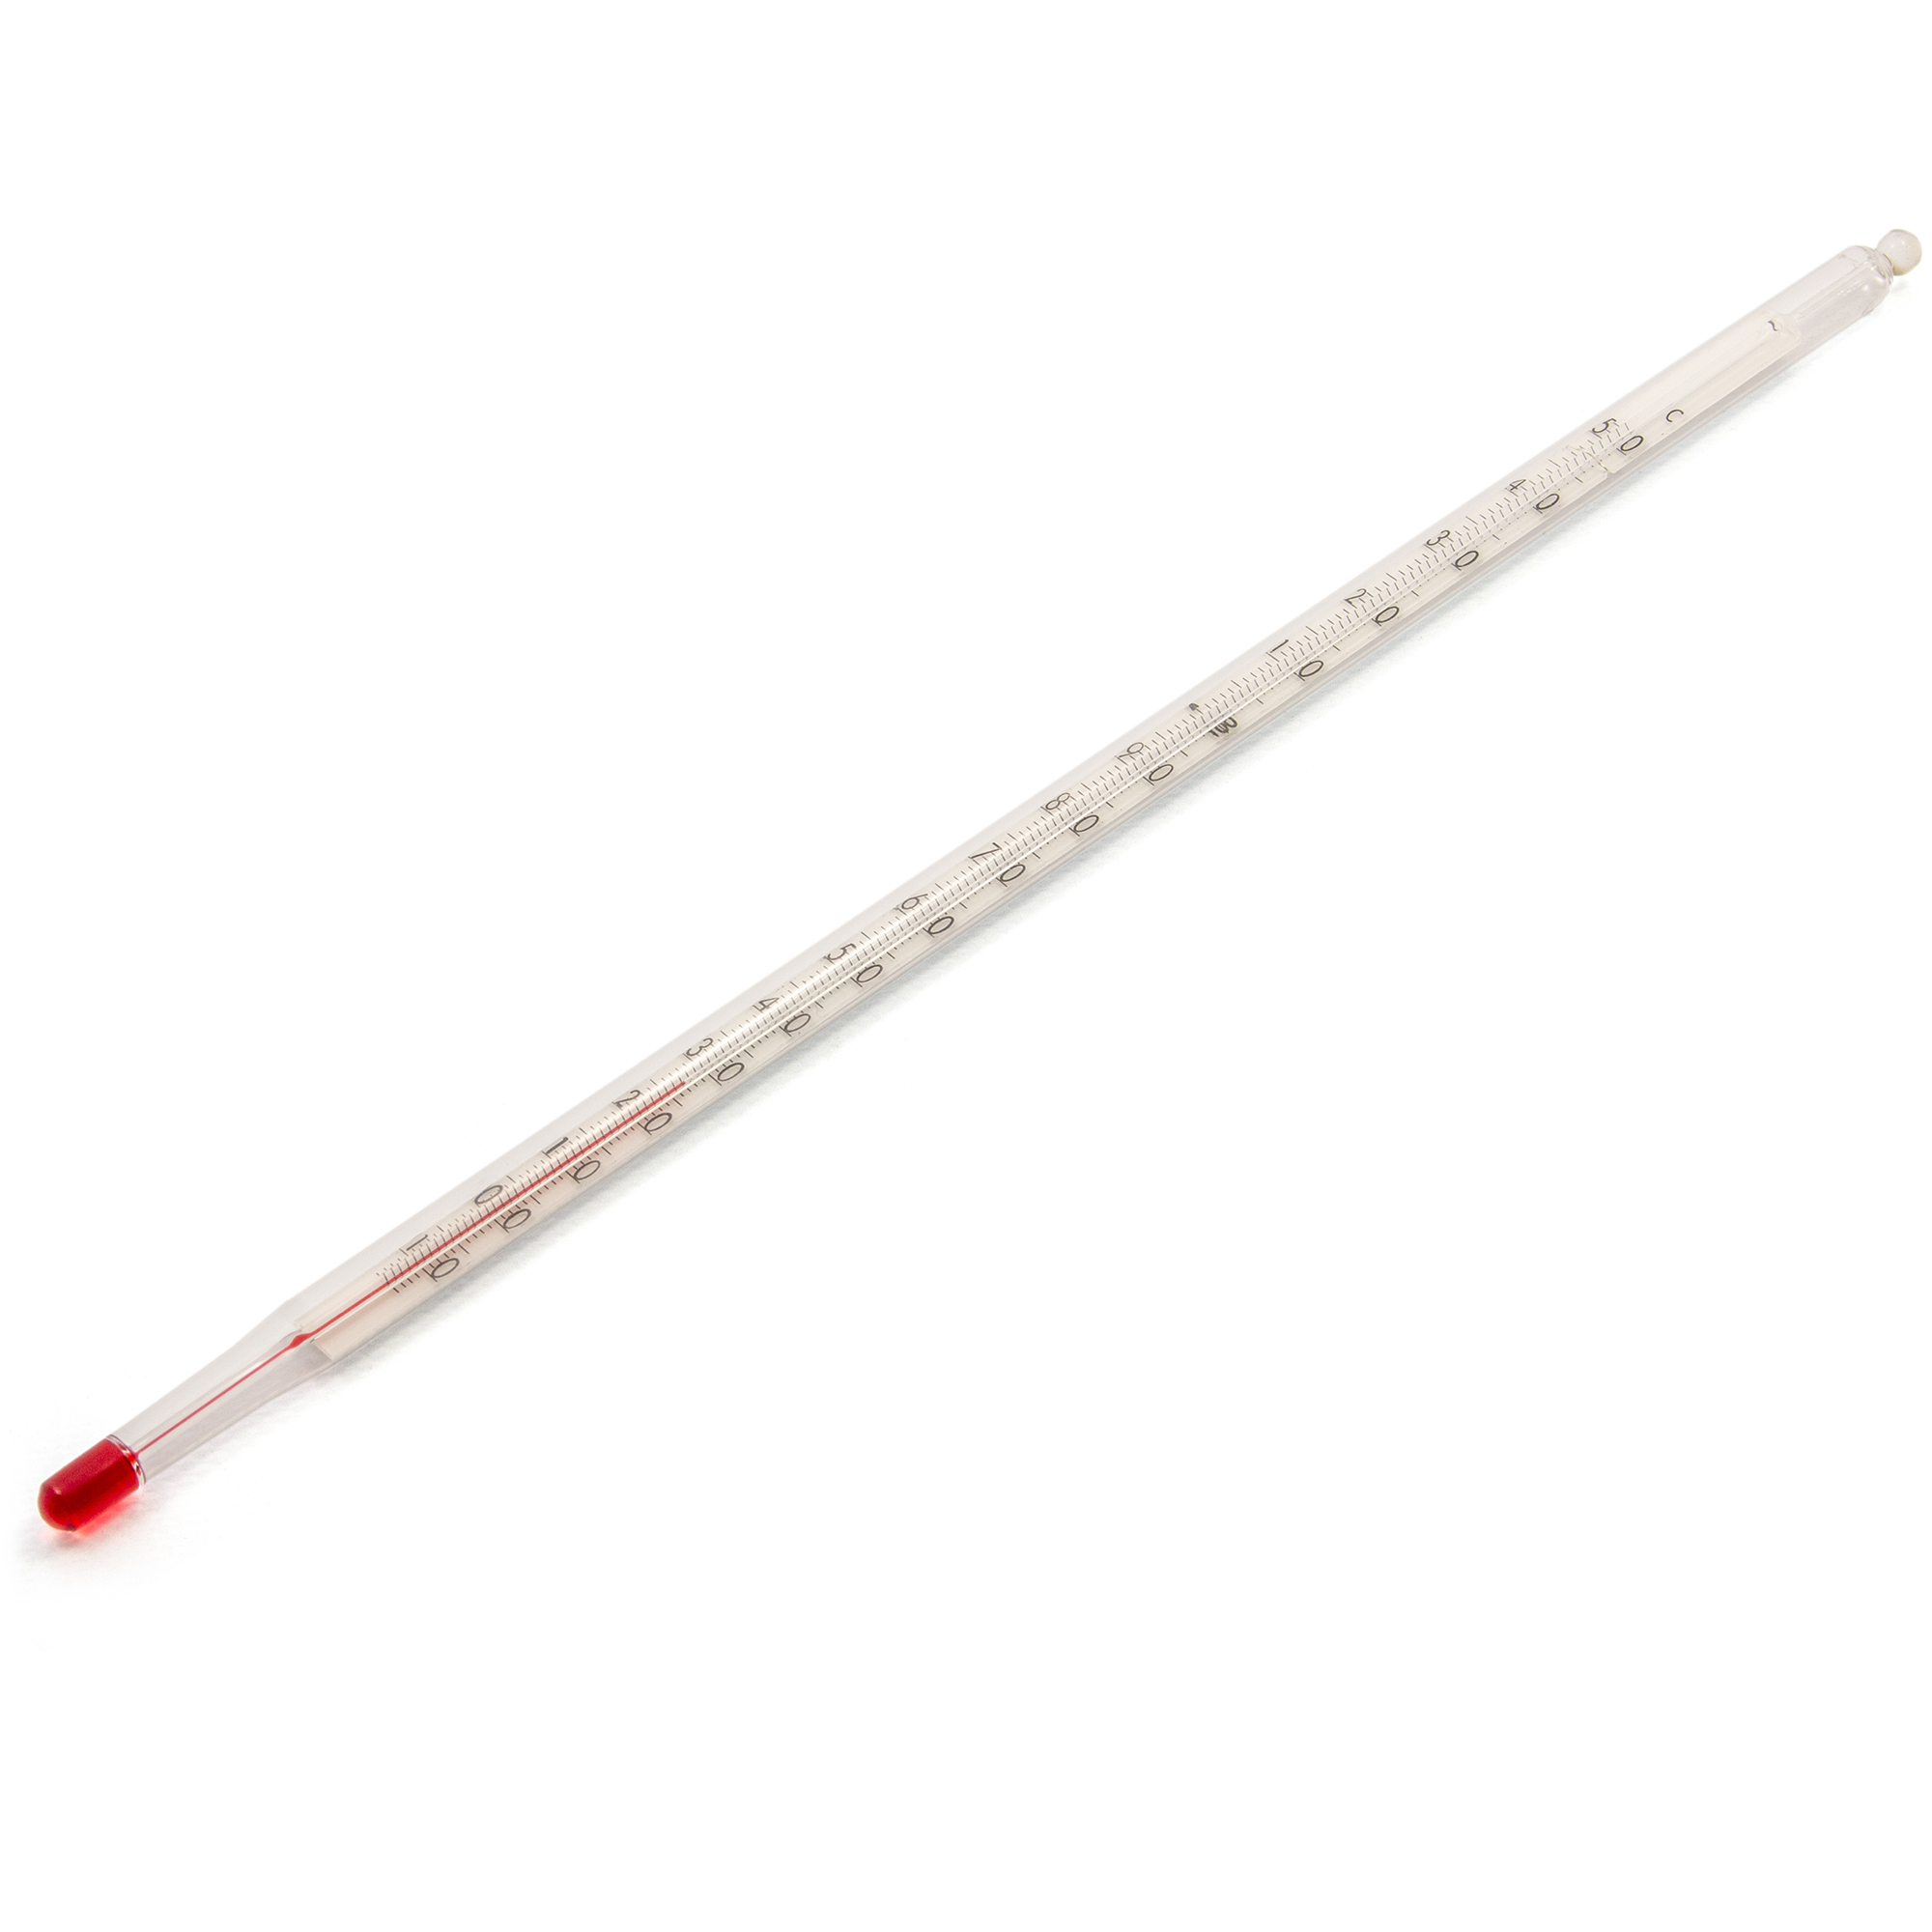 Precision thermometer glass with calibration certificate